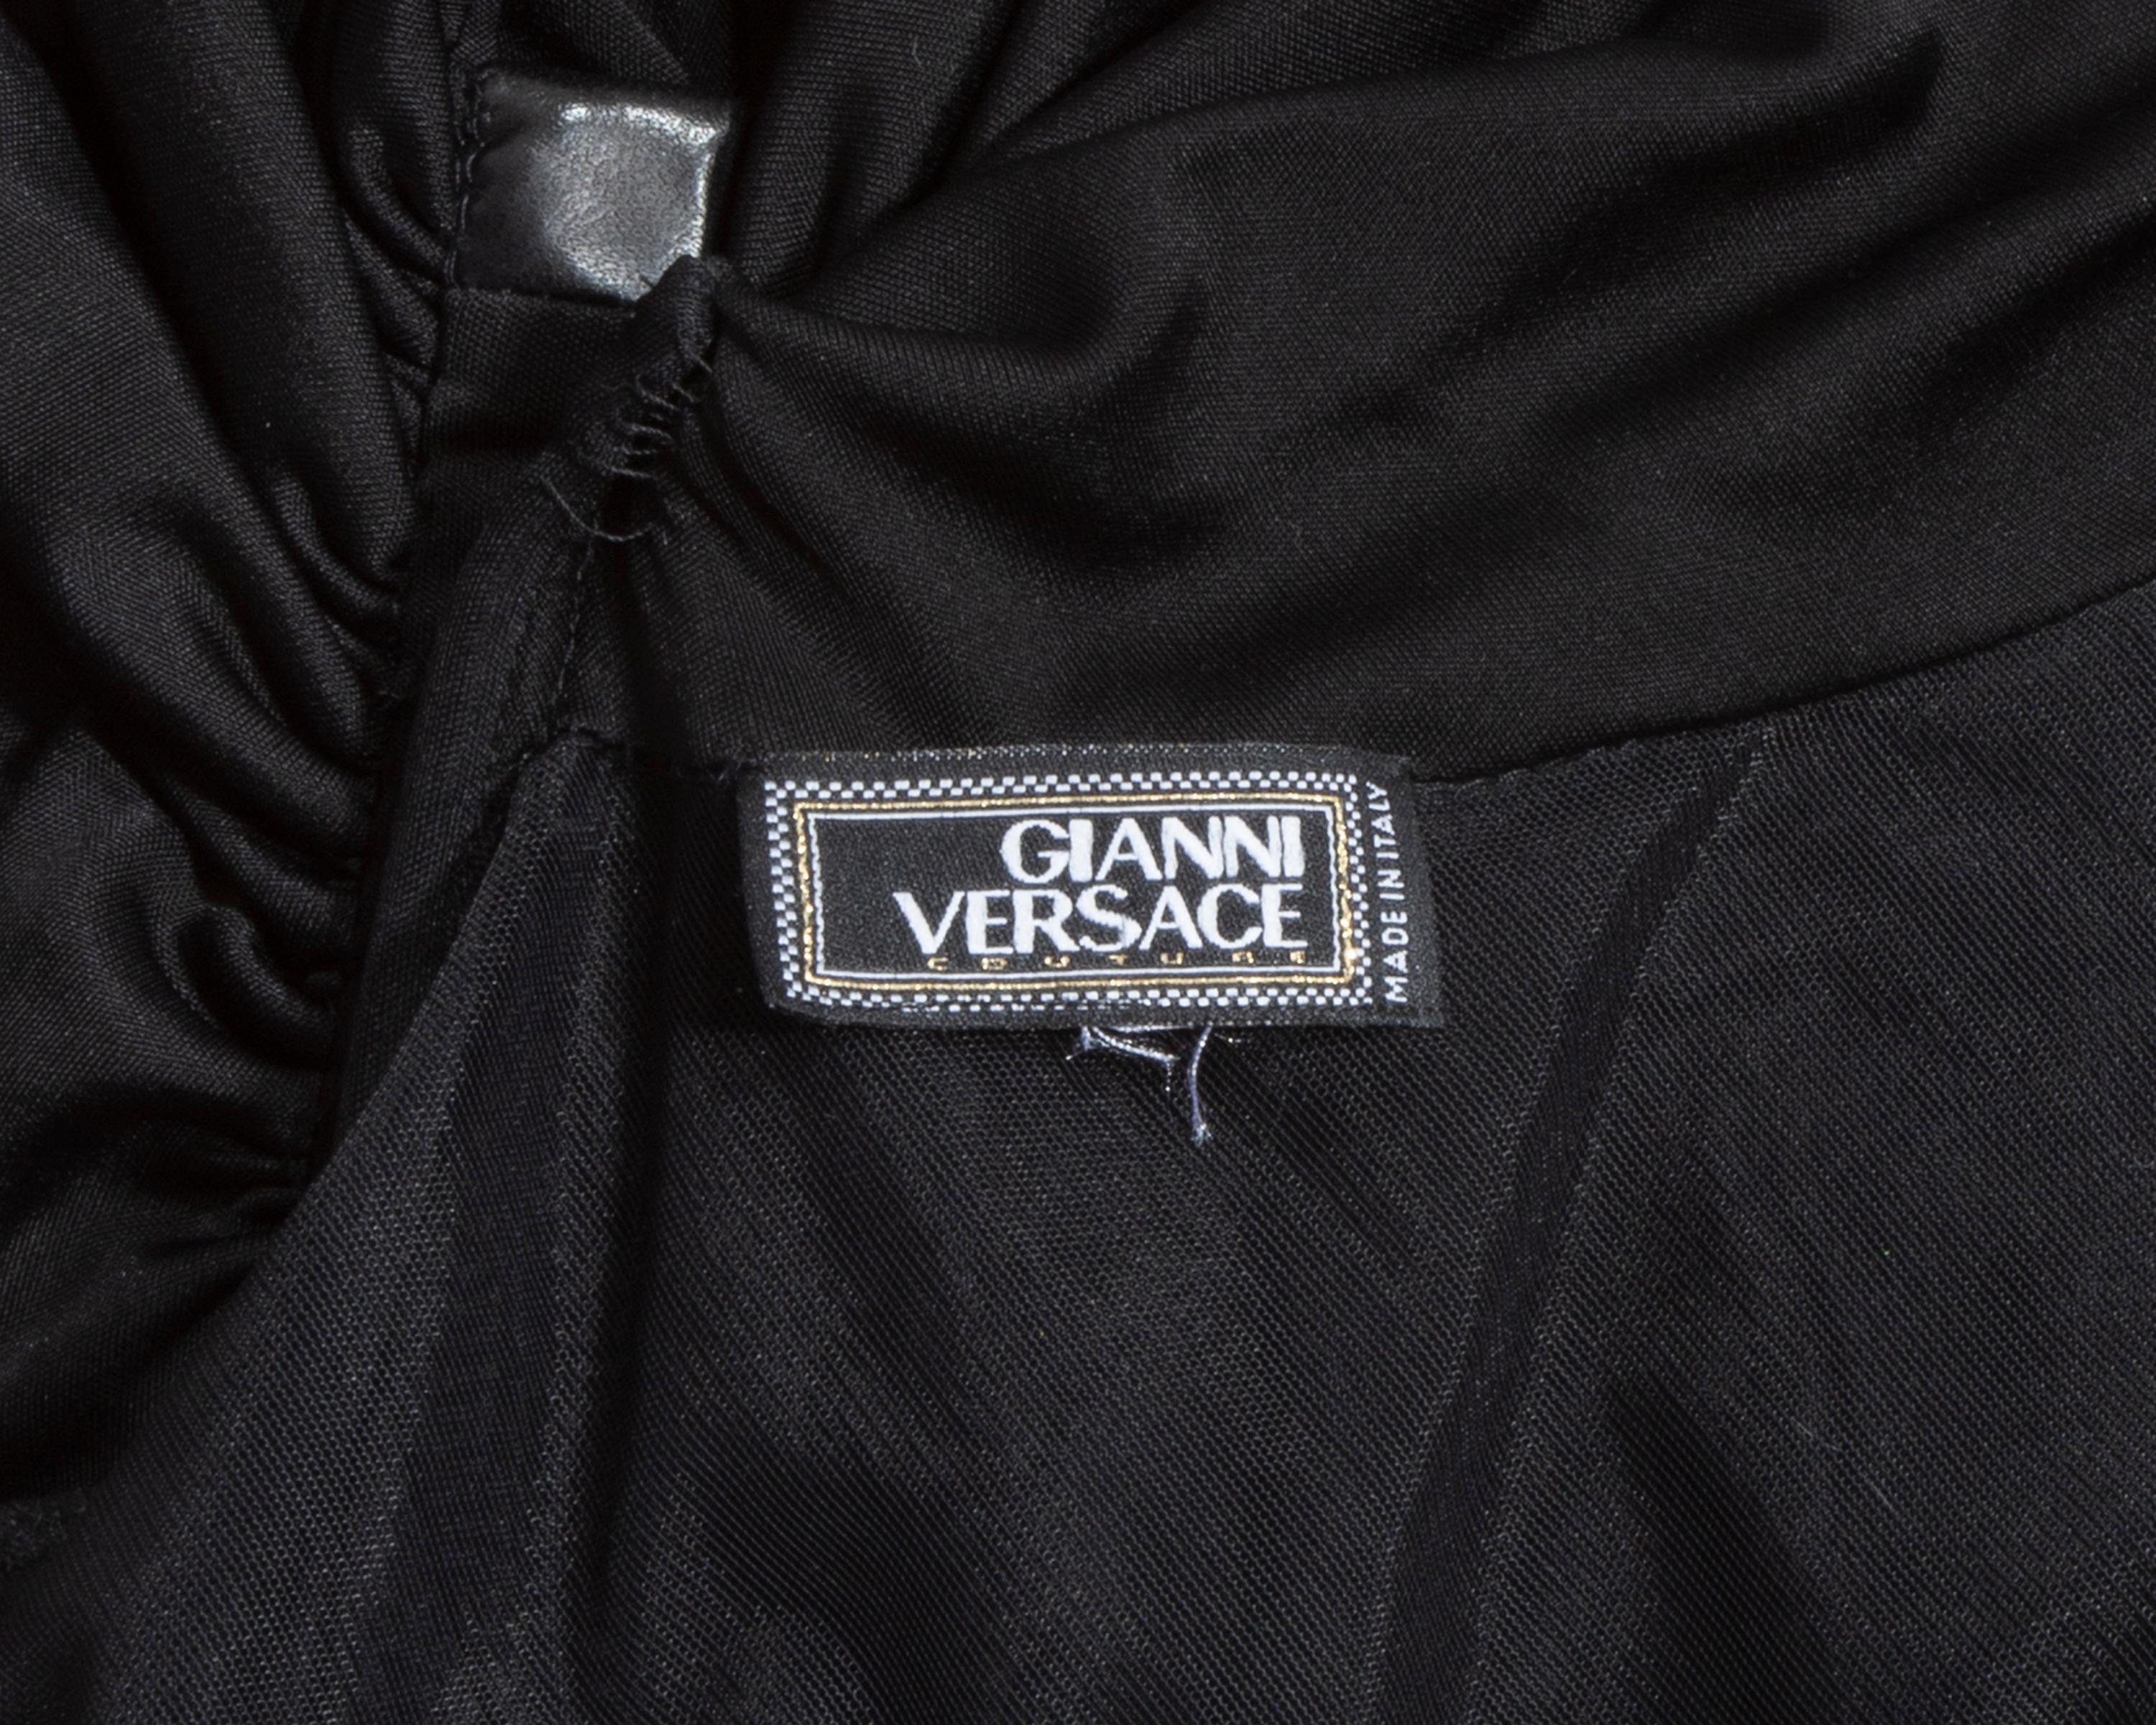 Gianni Versace black evening dress with leather strap ss 2001 For Sale 3